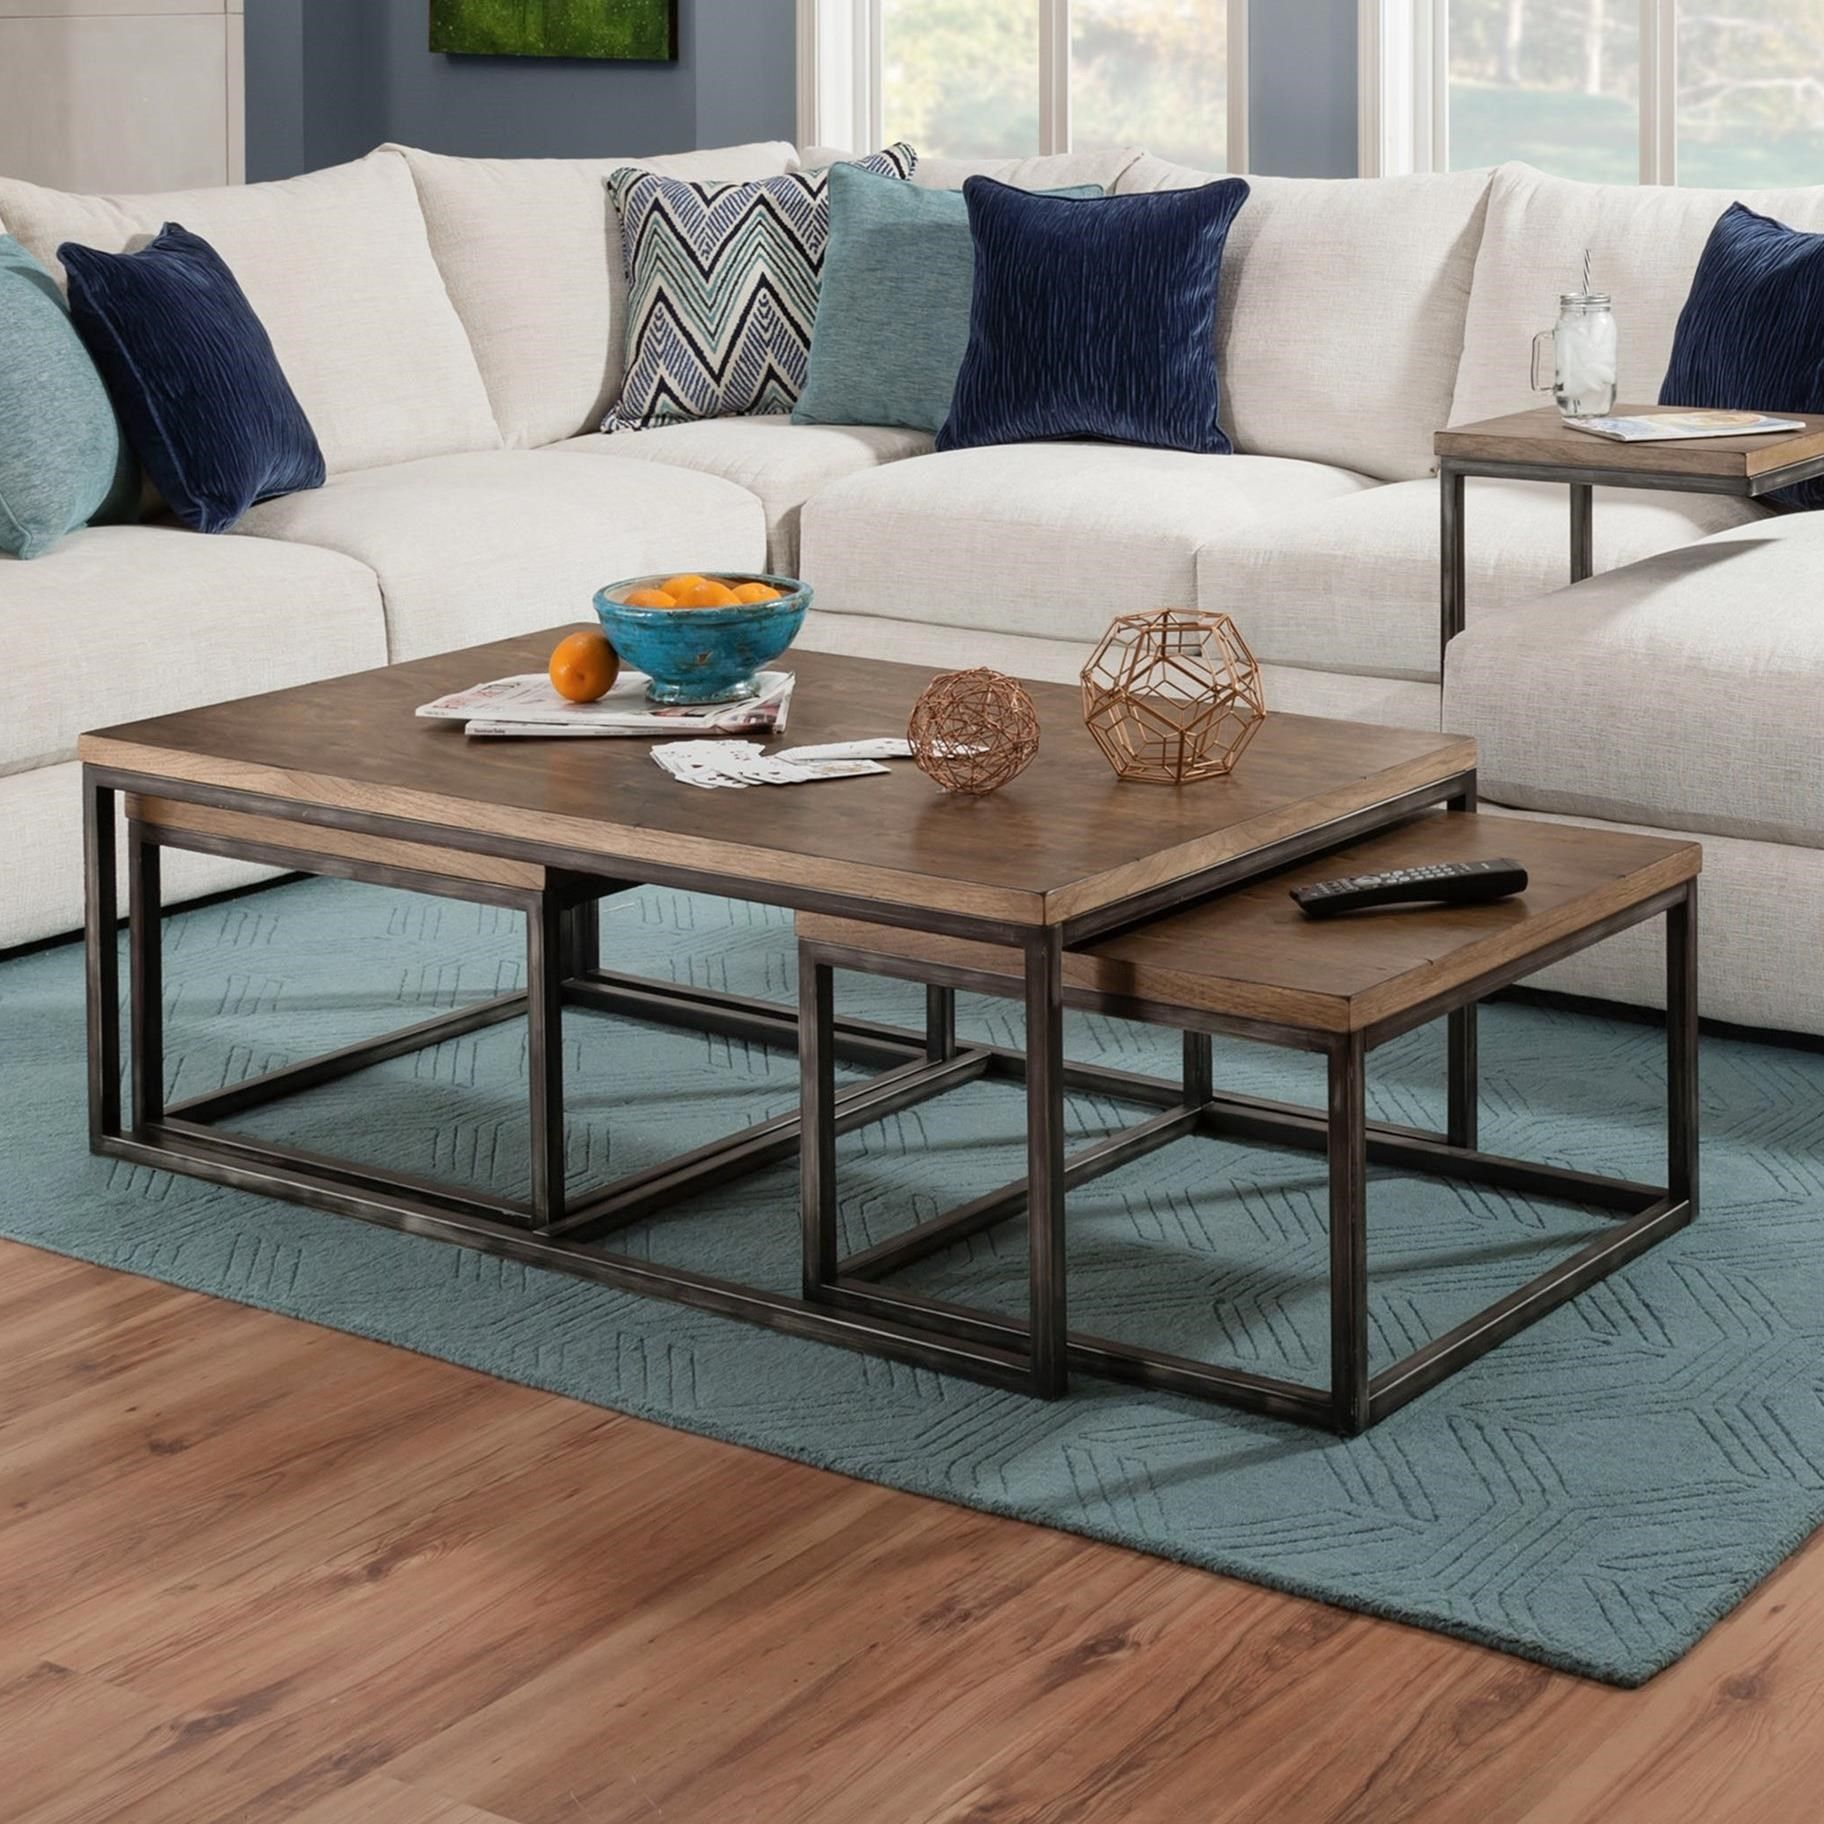 Modern Nesting Coffee Tables – Mid Century Modern Nesting Kidney Bean Pertaining To Nesting Coffee Tables (View 16 of 20)